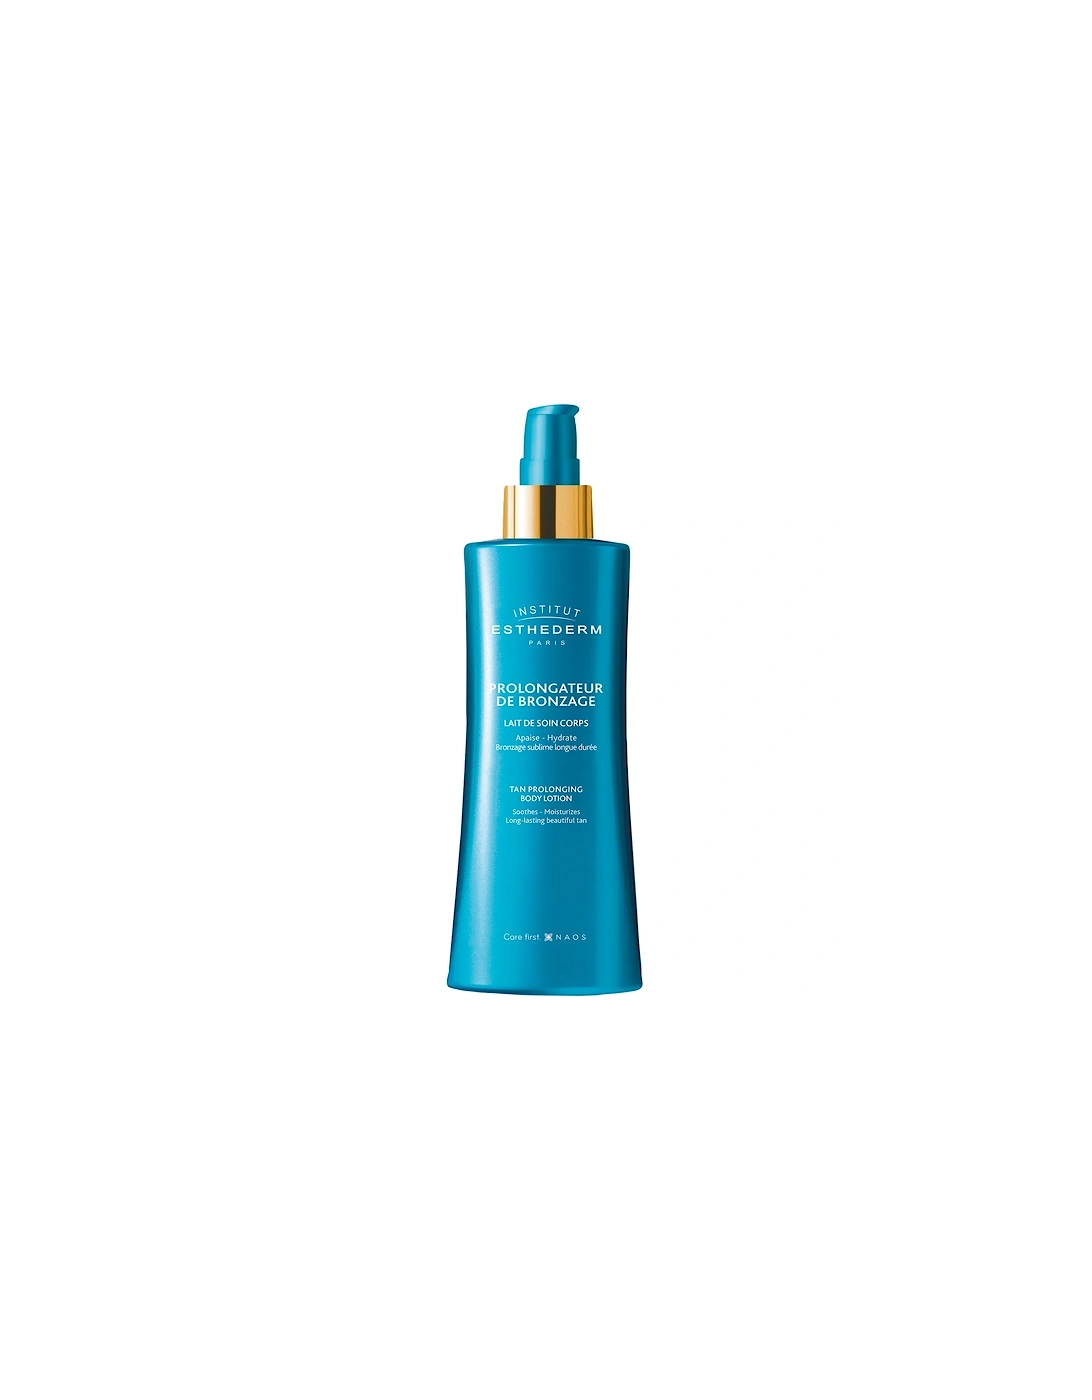 Tan-Prolonging After Sun Body Lotion 200ml - Institut Esthederm, 2 of 1